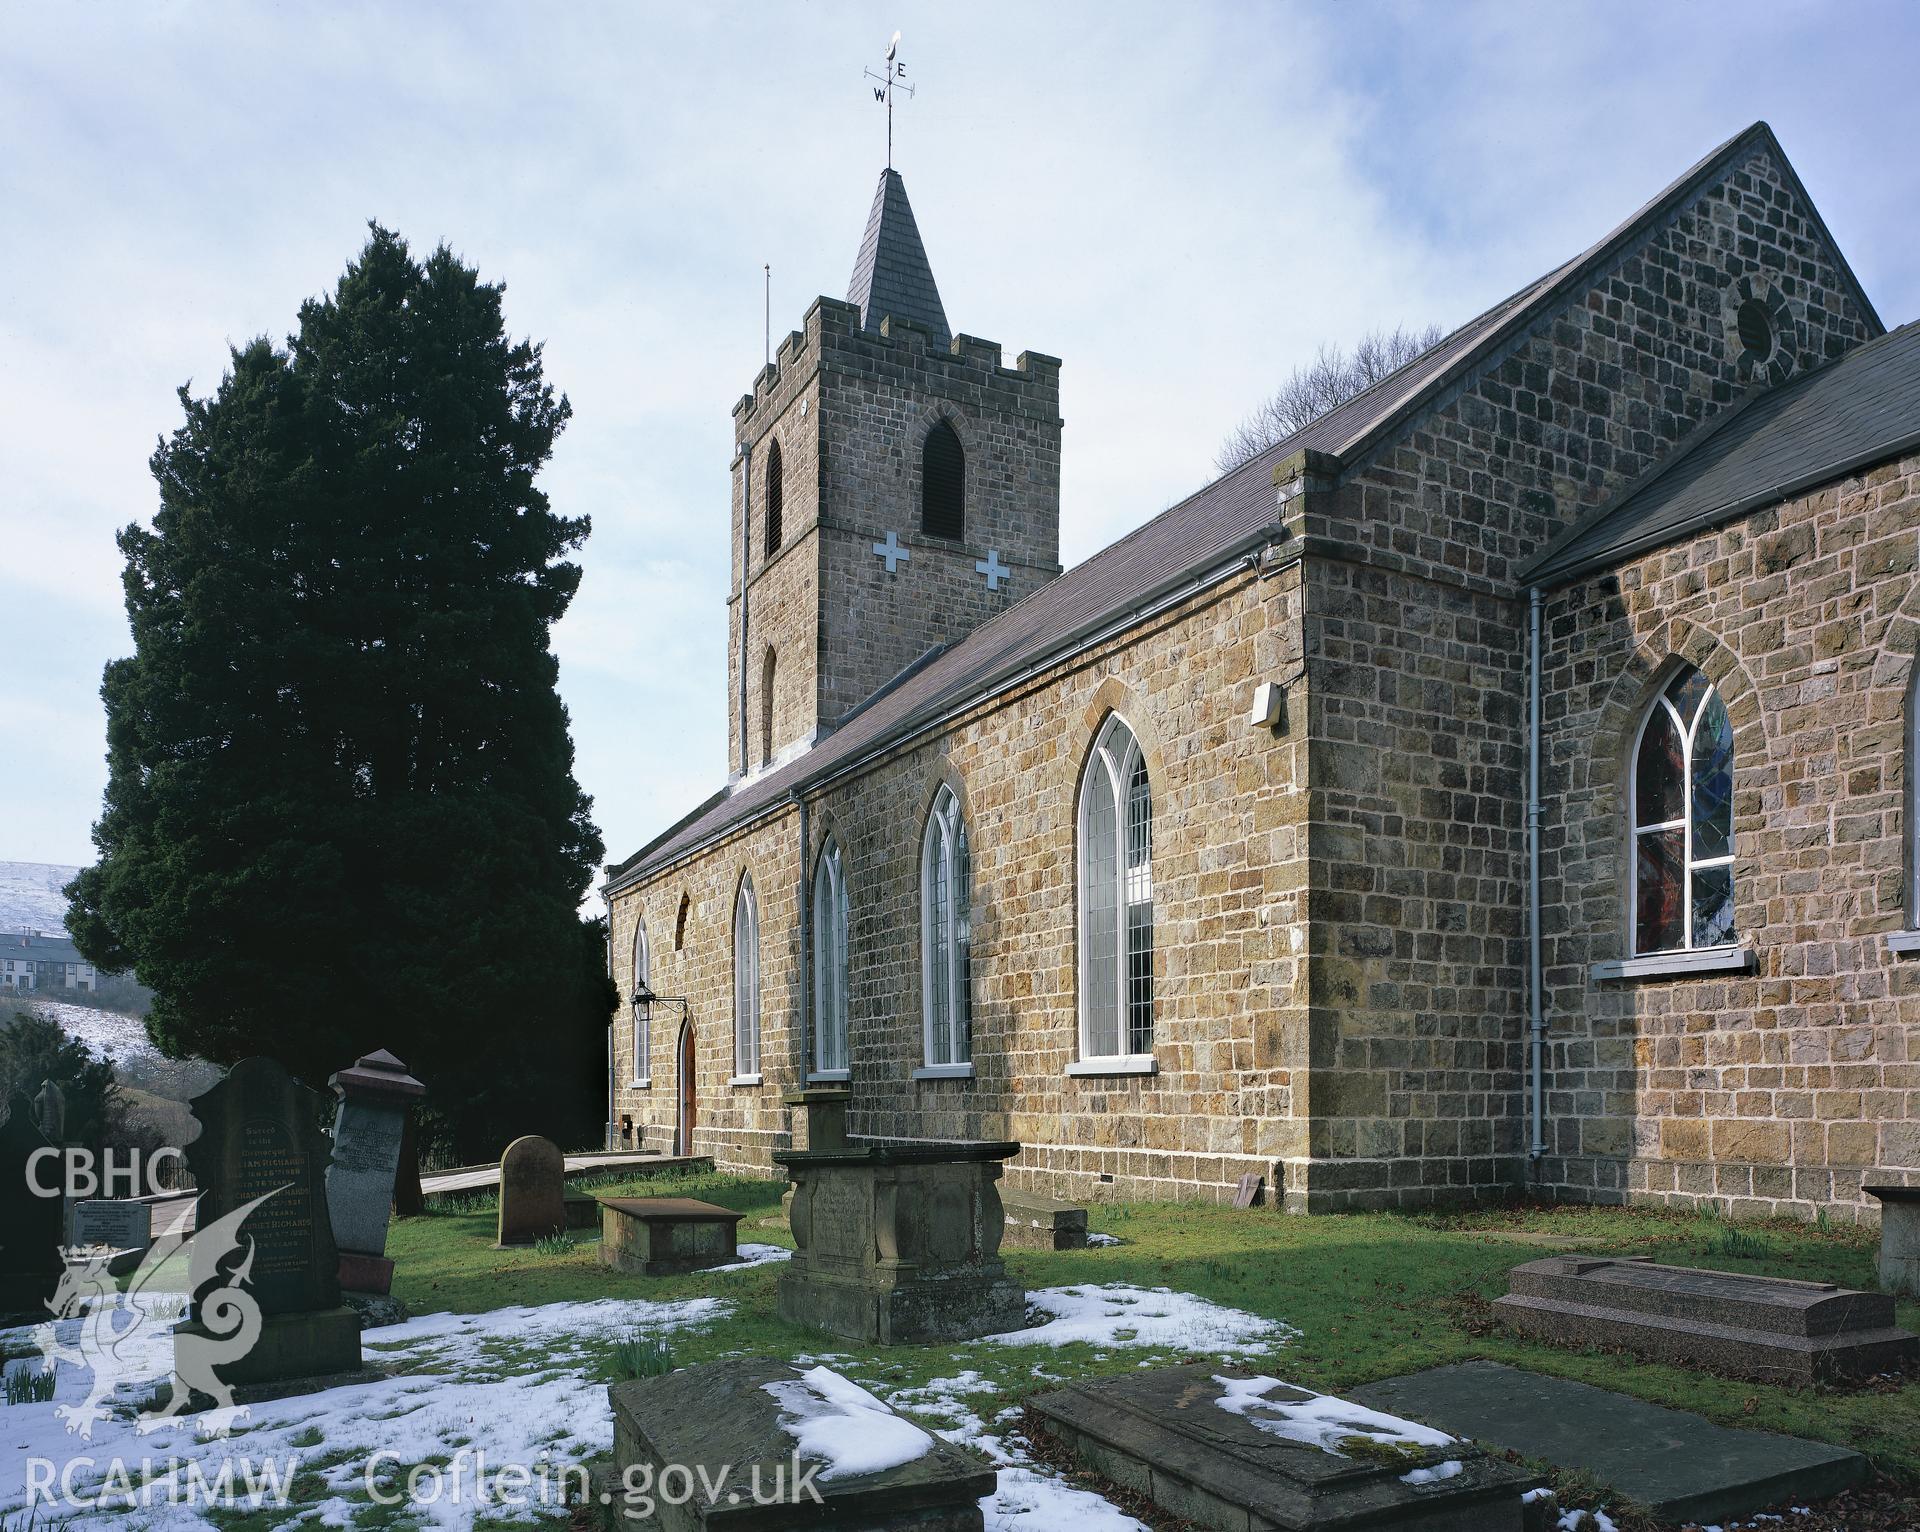 RCAHMW colour transparency showing exterior view of St Peter's Church, Blaenavon